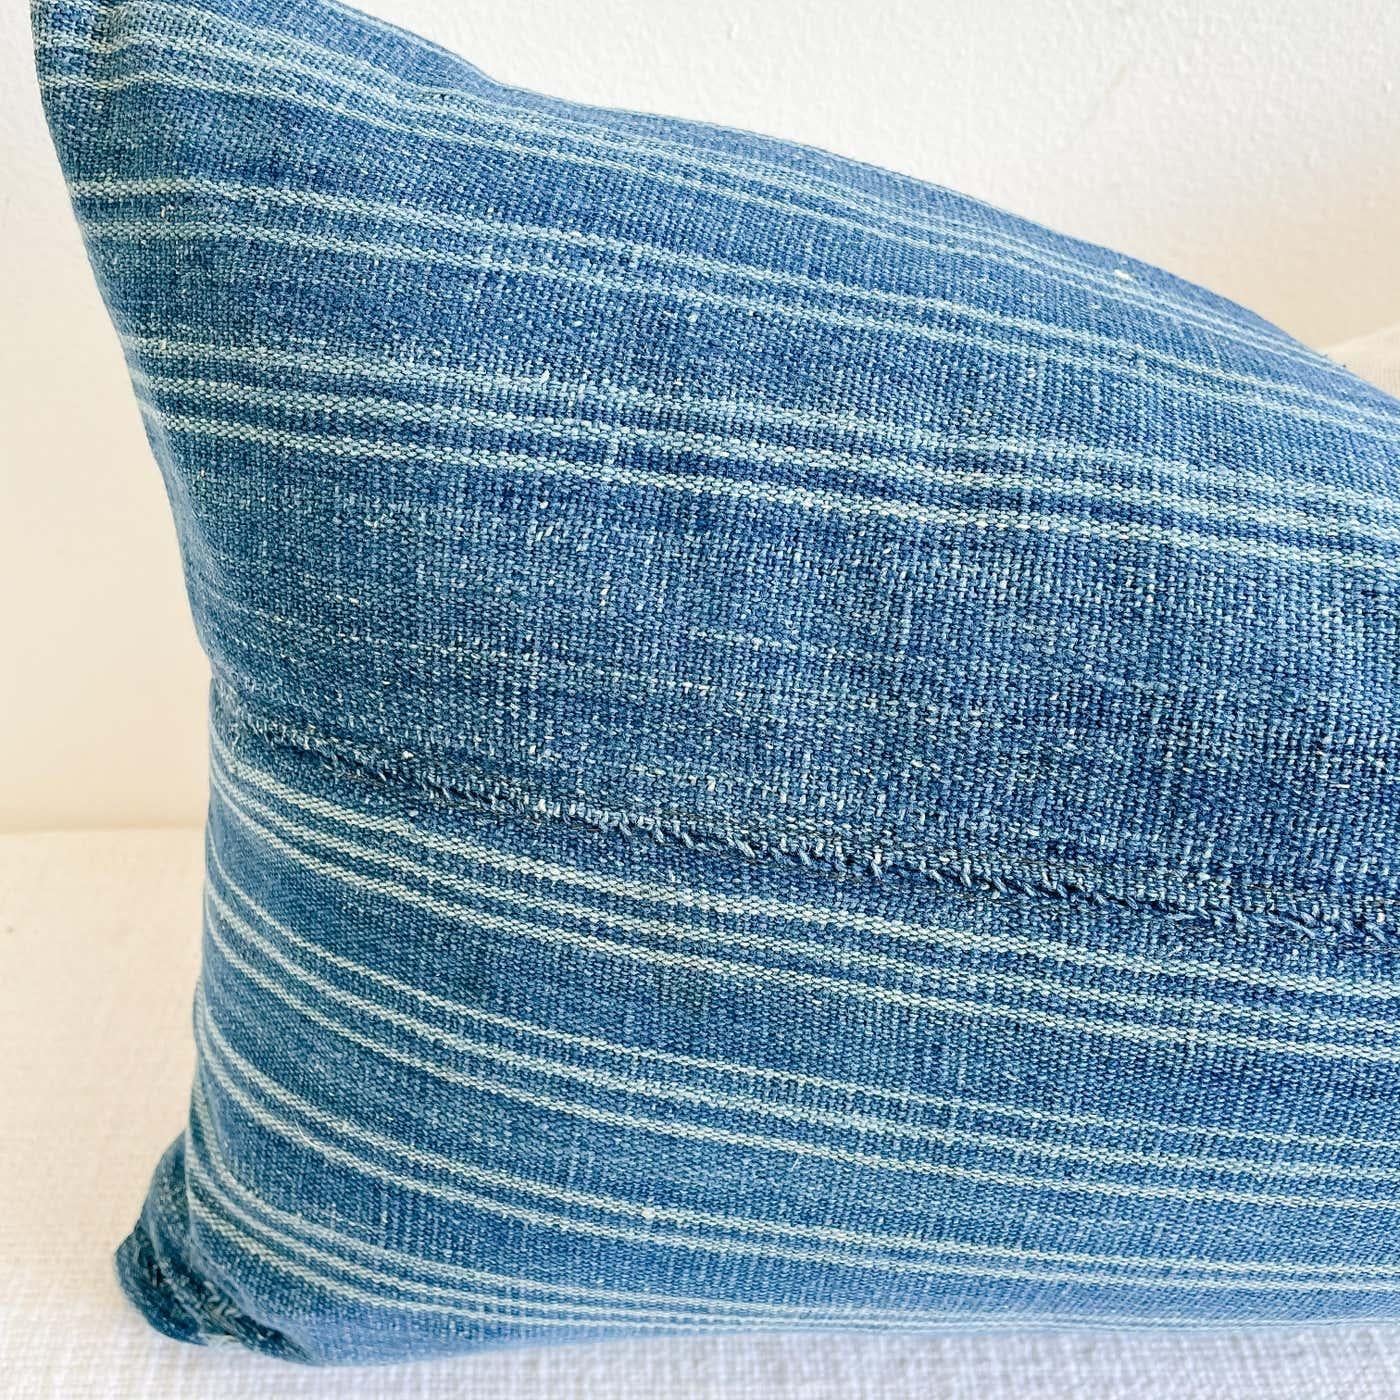 This vintage textile pillow face features a vintage batik front, natural linen backing, and original hand embroidery. The backing is 100% Belgian linen in natural linen. Our pillows are constructed with vintage one of a kind textiles from around the